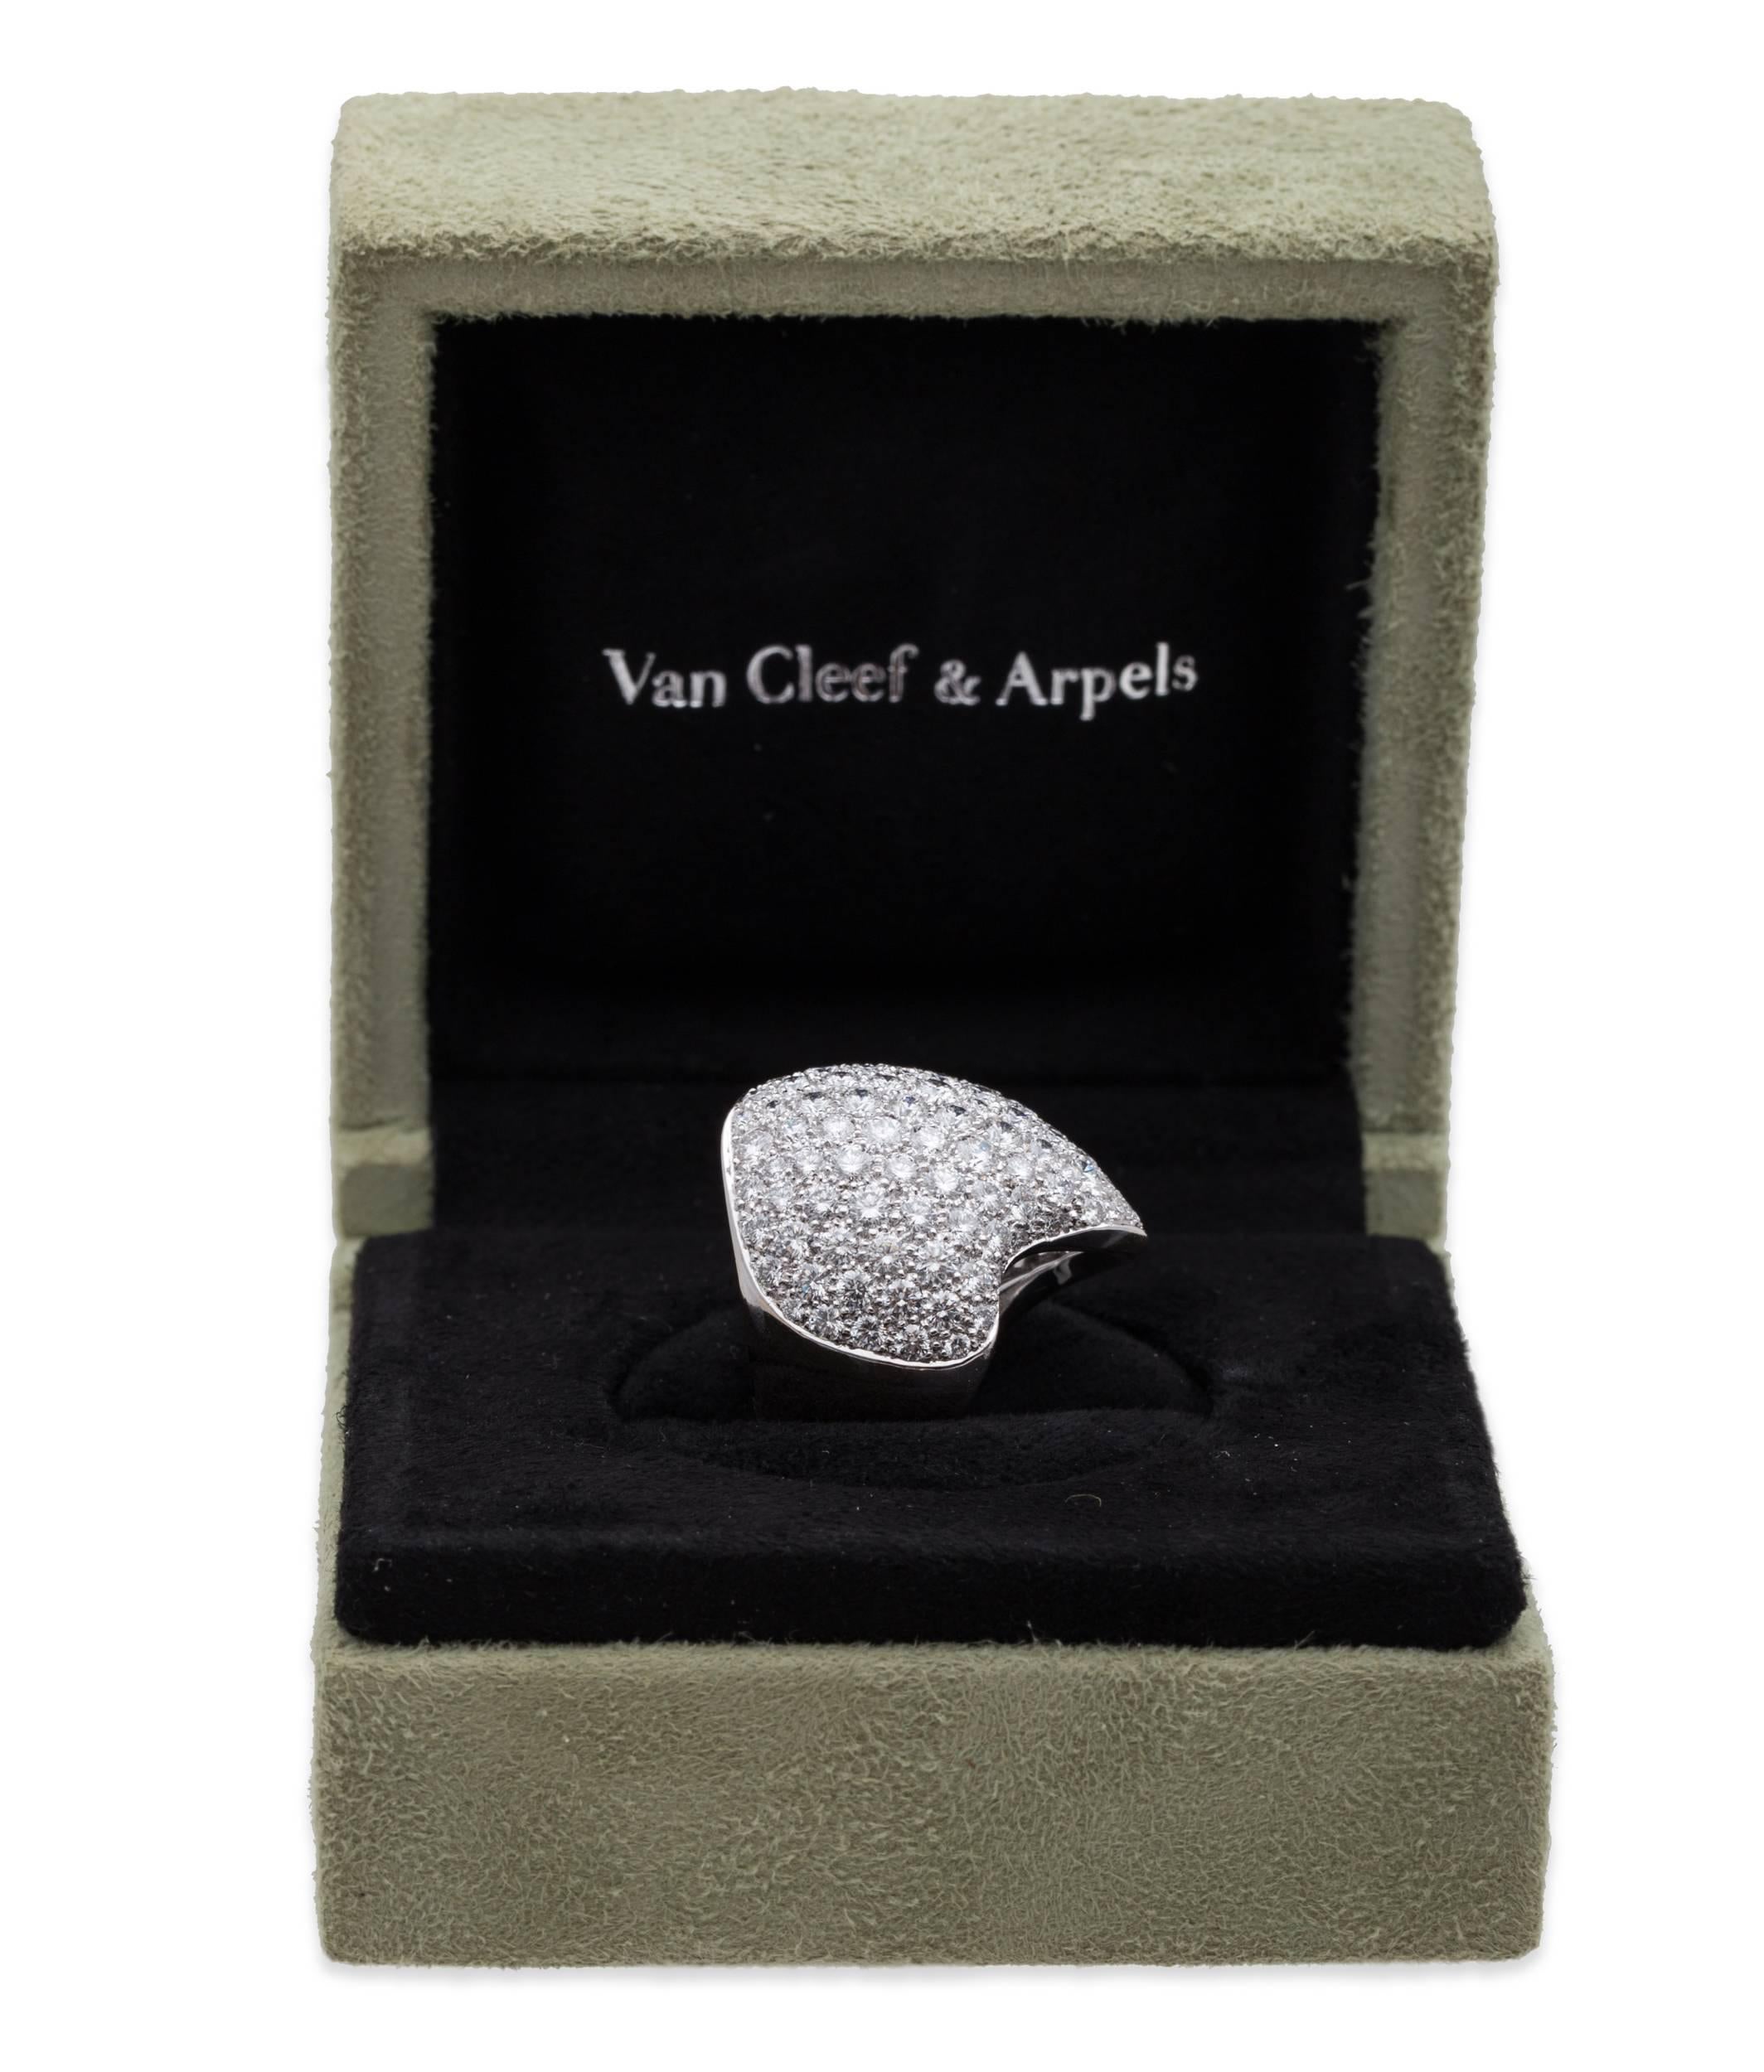 Van Cleef & Arpels Diamond Pave Gold Ring For Sale 1